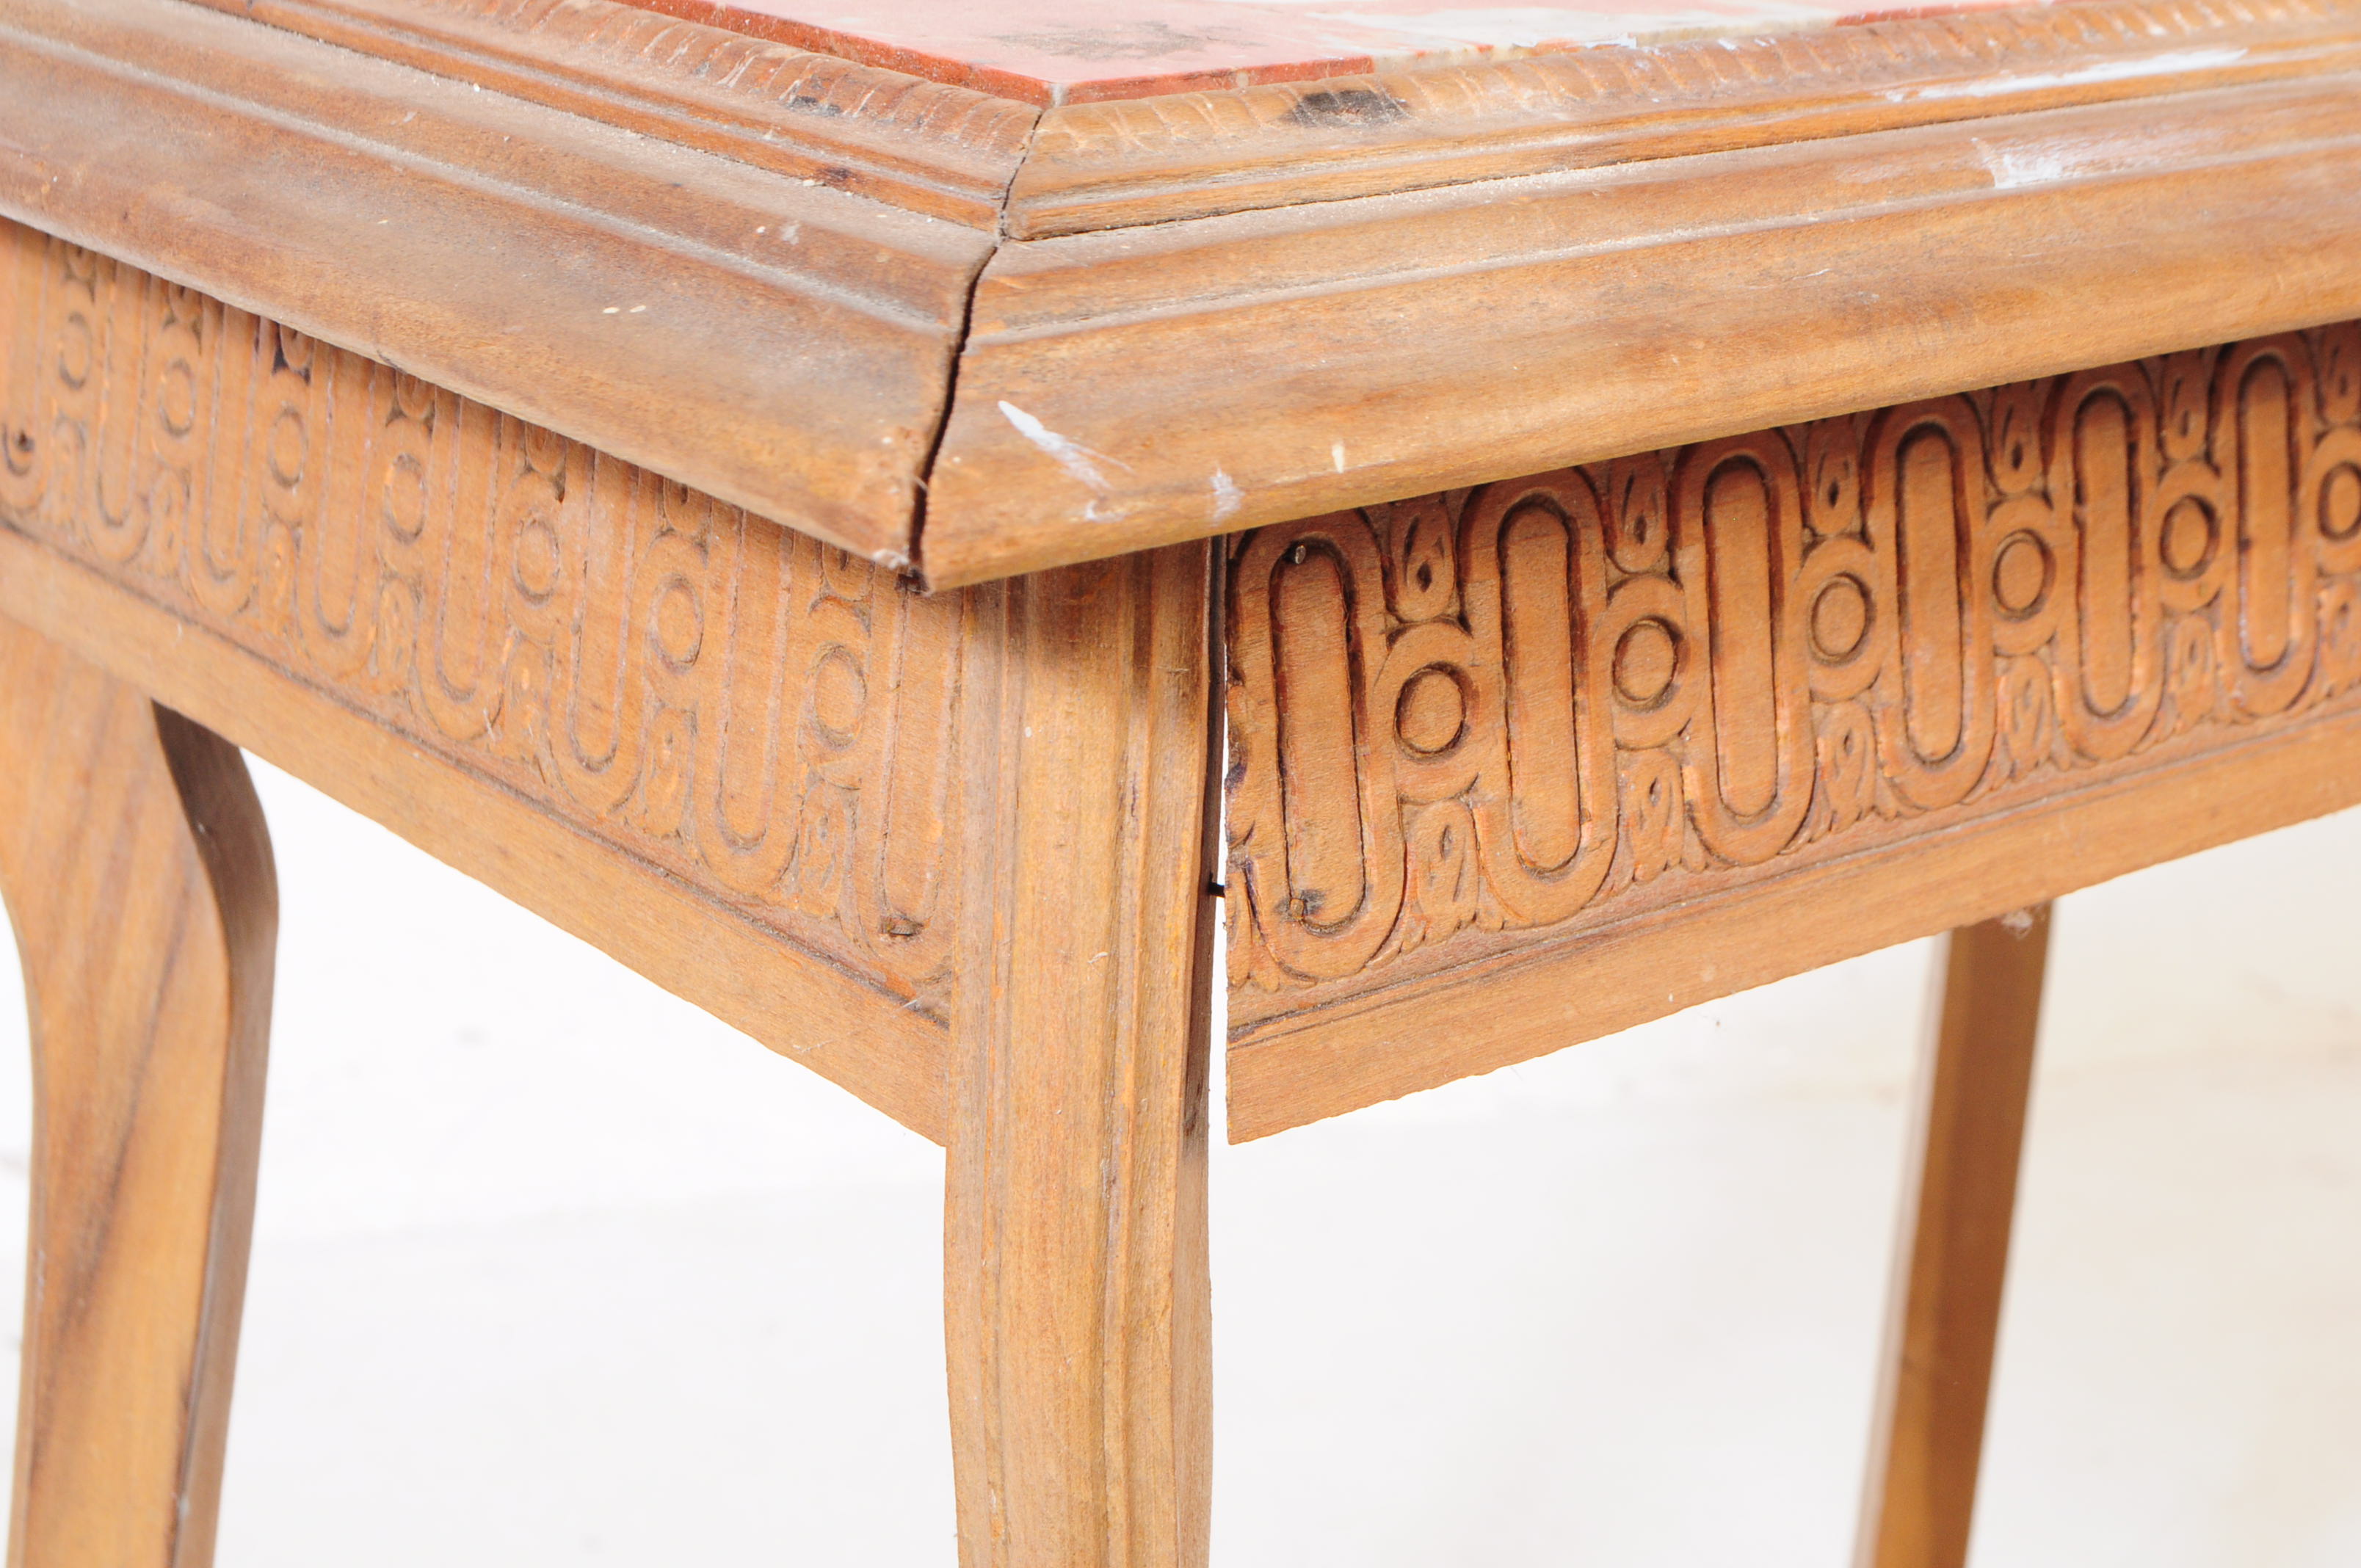 FRENCH EARLY 20TH CENTURY ARTS & CRAFTS MARBLE TOP TABLE - Image 3 of 5